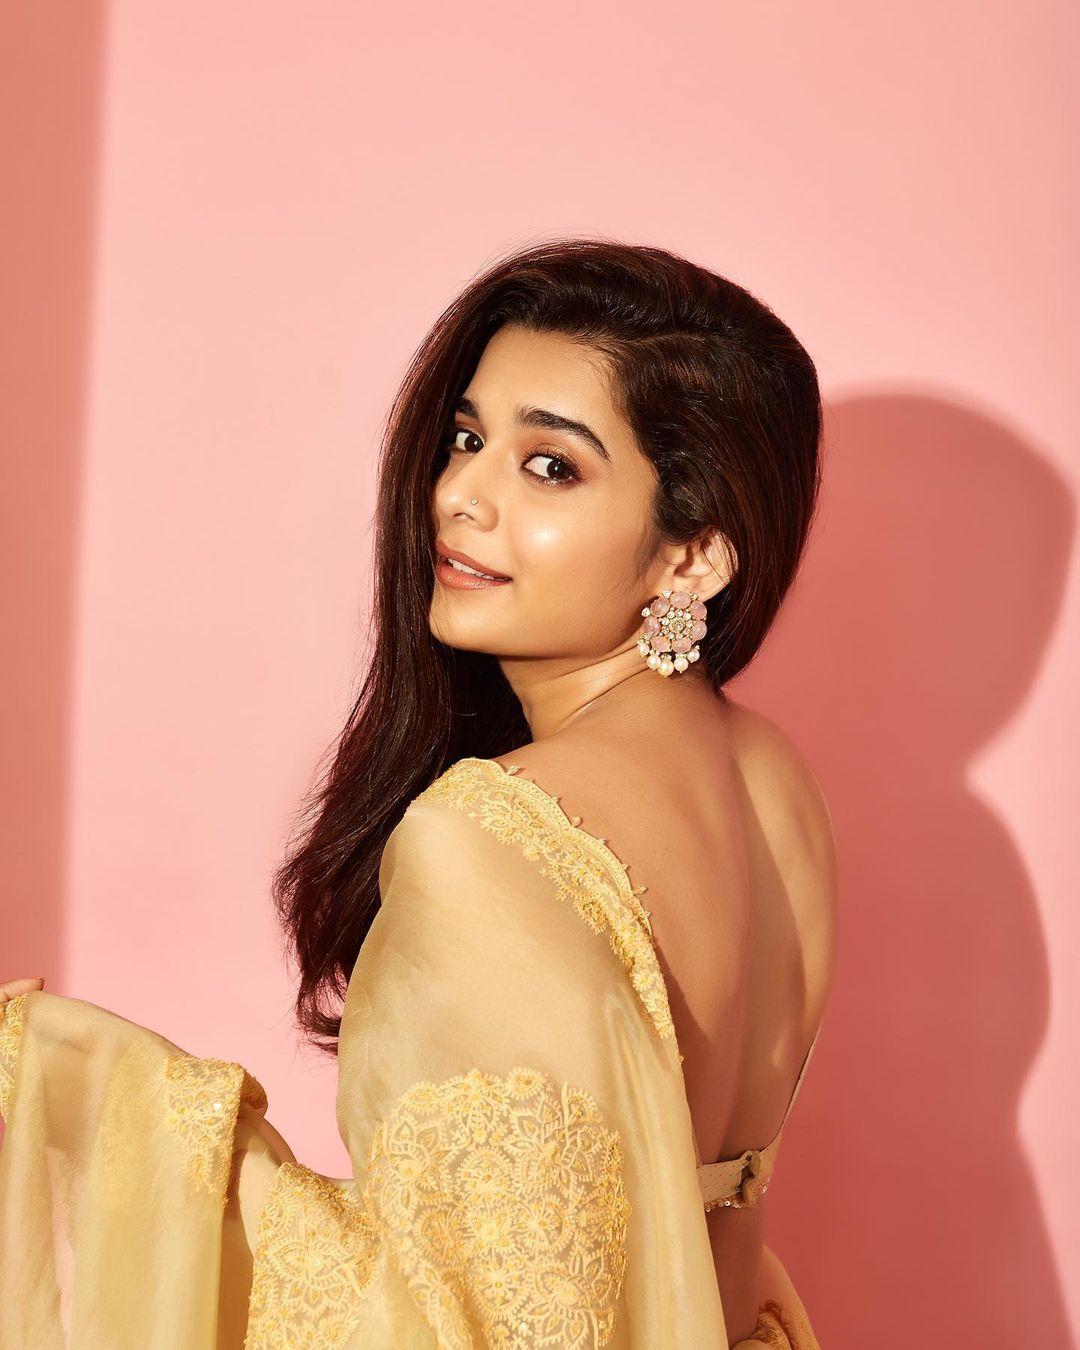 Leaving her hair open, she opted for contrasting pink earrings and a nude makeup look that's simply breathtaking. This ensemble is a perfect balance of elegance and vibrancy